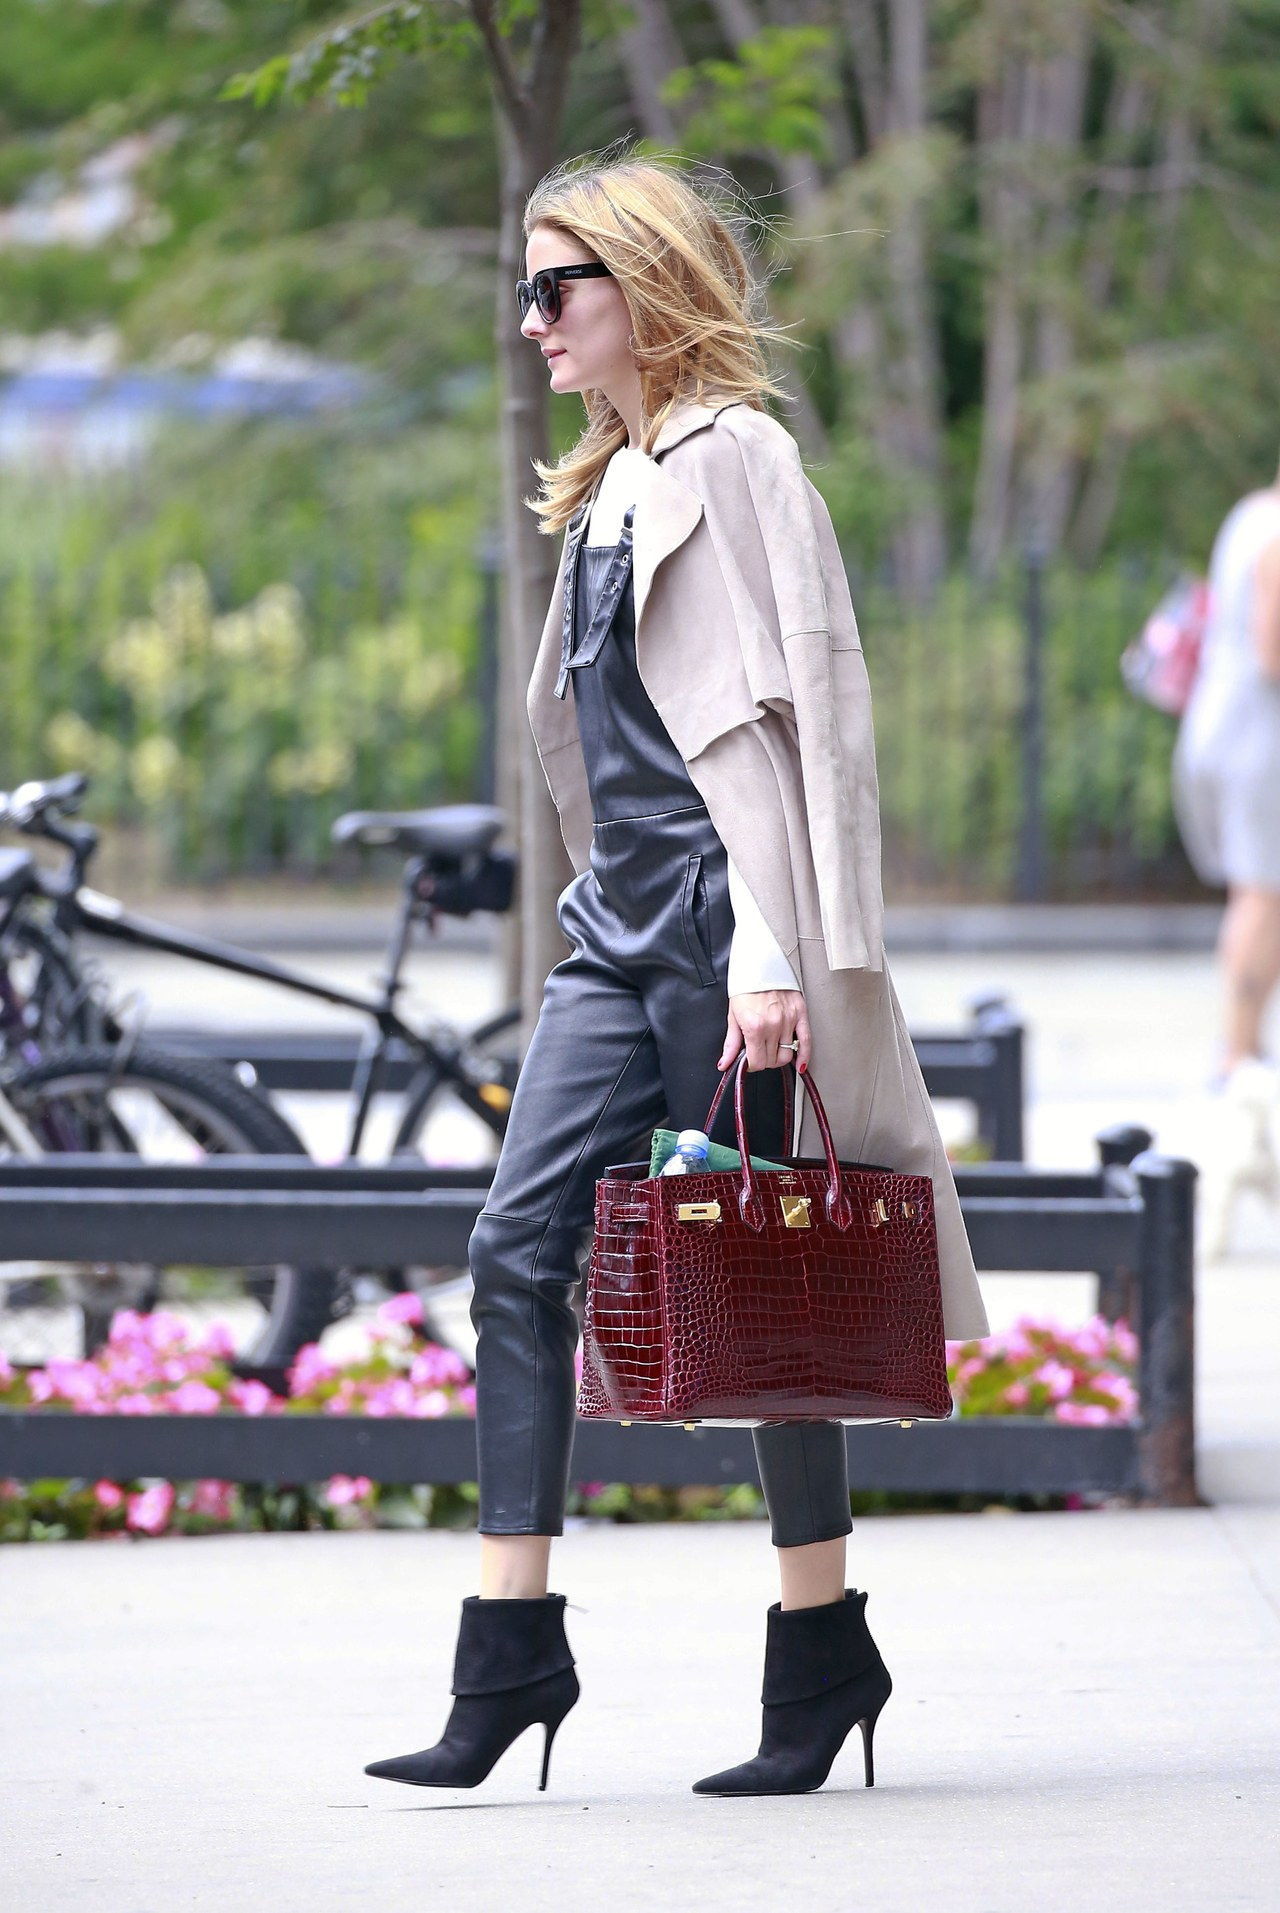 EKSKLUSIV: Olivia Palermo wears black leather overalls under a Trench Coat paired with maroon leather bag in New York City.Pictured: Olivia PalermoRef: SPL1309888 270616 EXCLUSIVEPicture by: Splash NewsSplash News and PicturesLos Angeles:310-821-2666New York:212-619-2666London:870-934-2666photodesk@splashnews.com